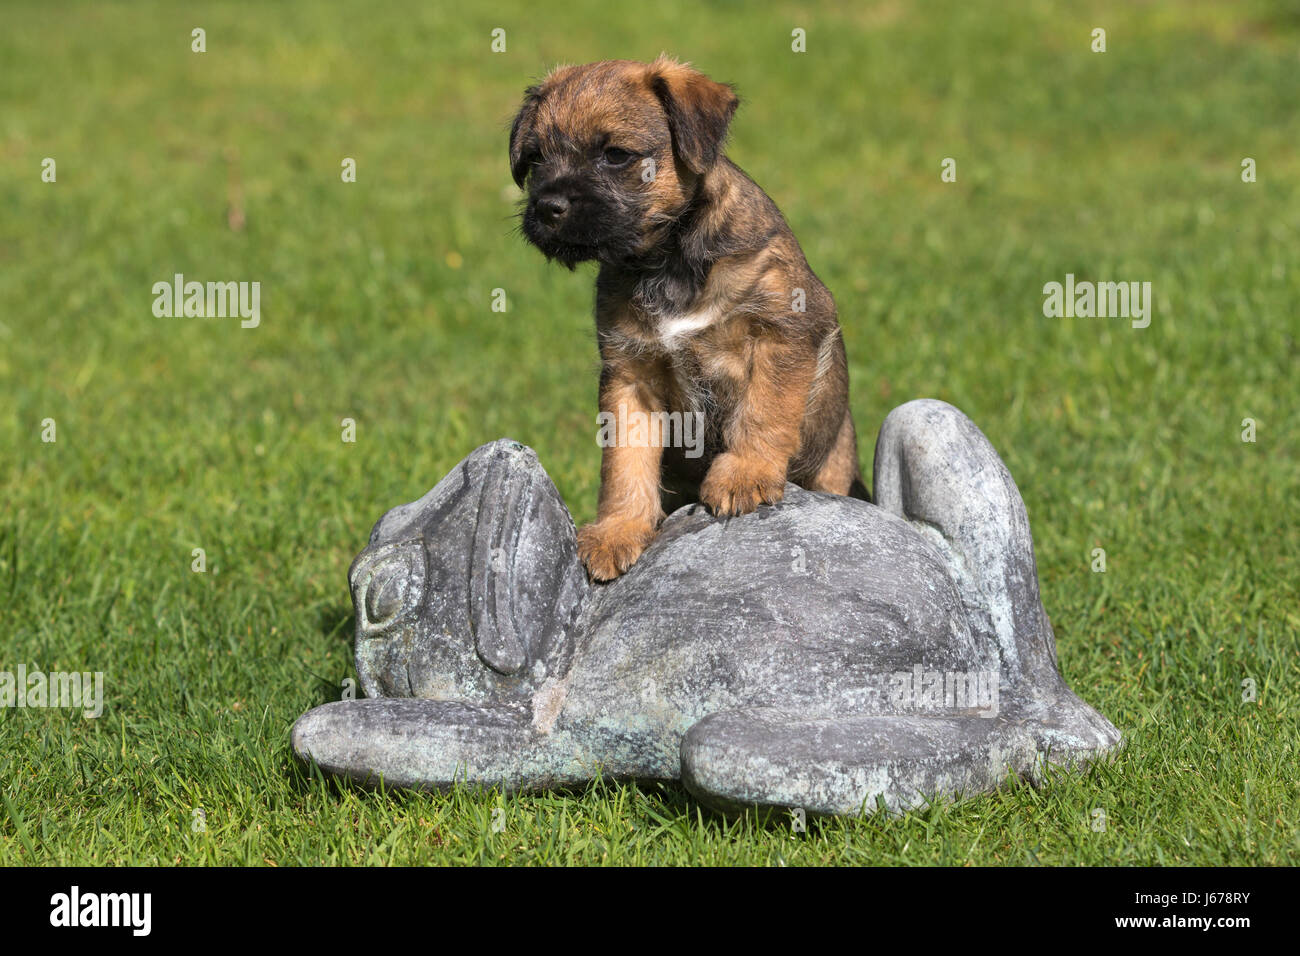 Border Terrier Puppy standing on a stone frog Stock Photo